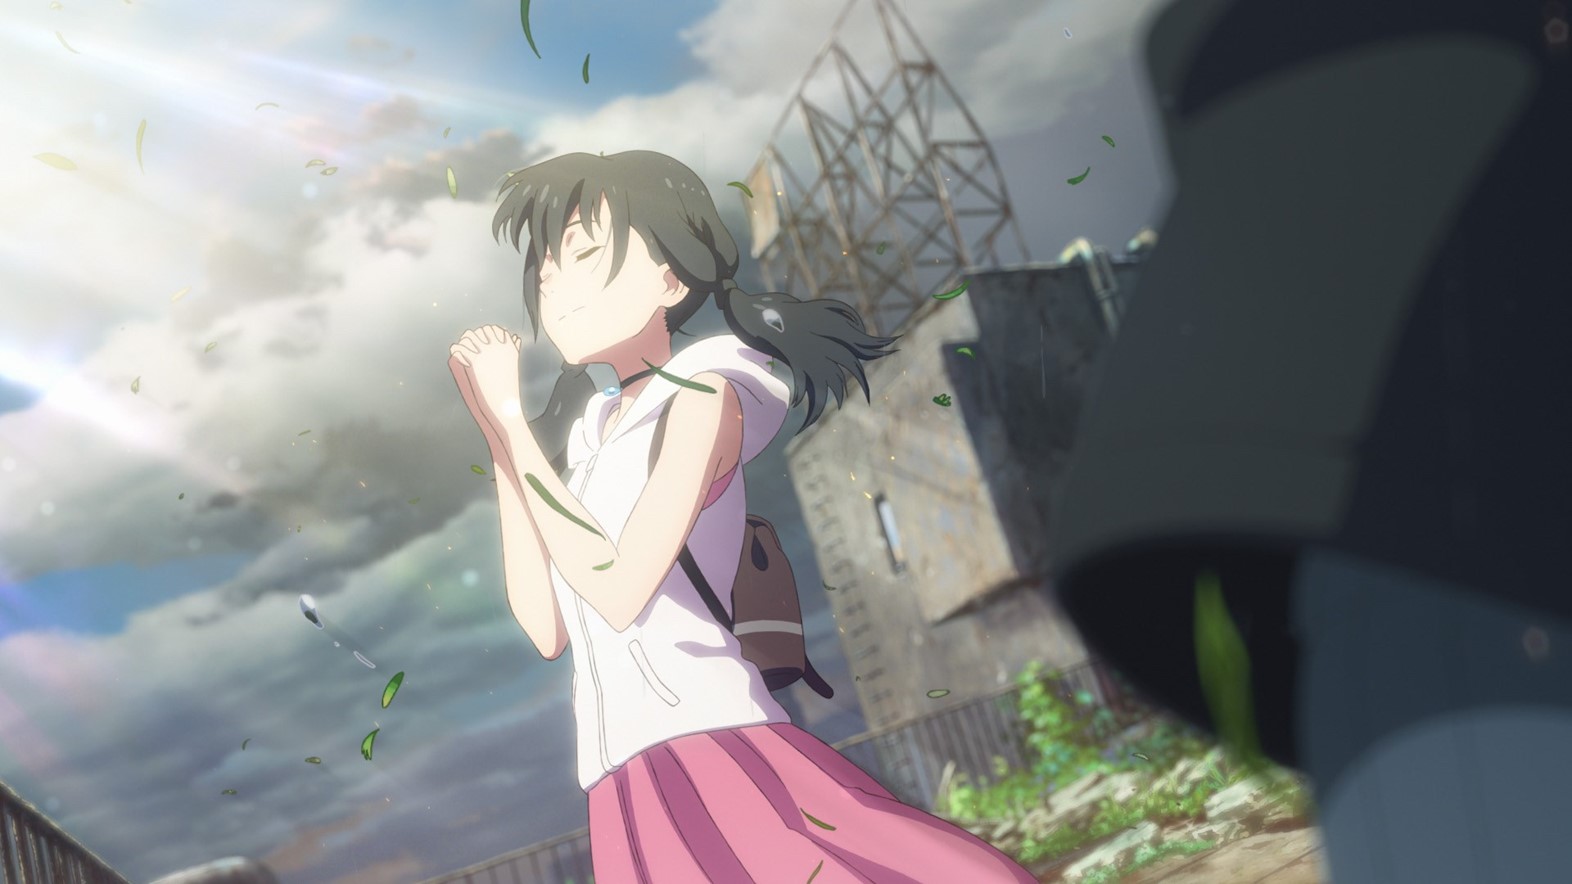 The global warming-inspired anime storming Japan's box offices